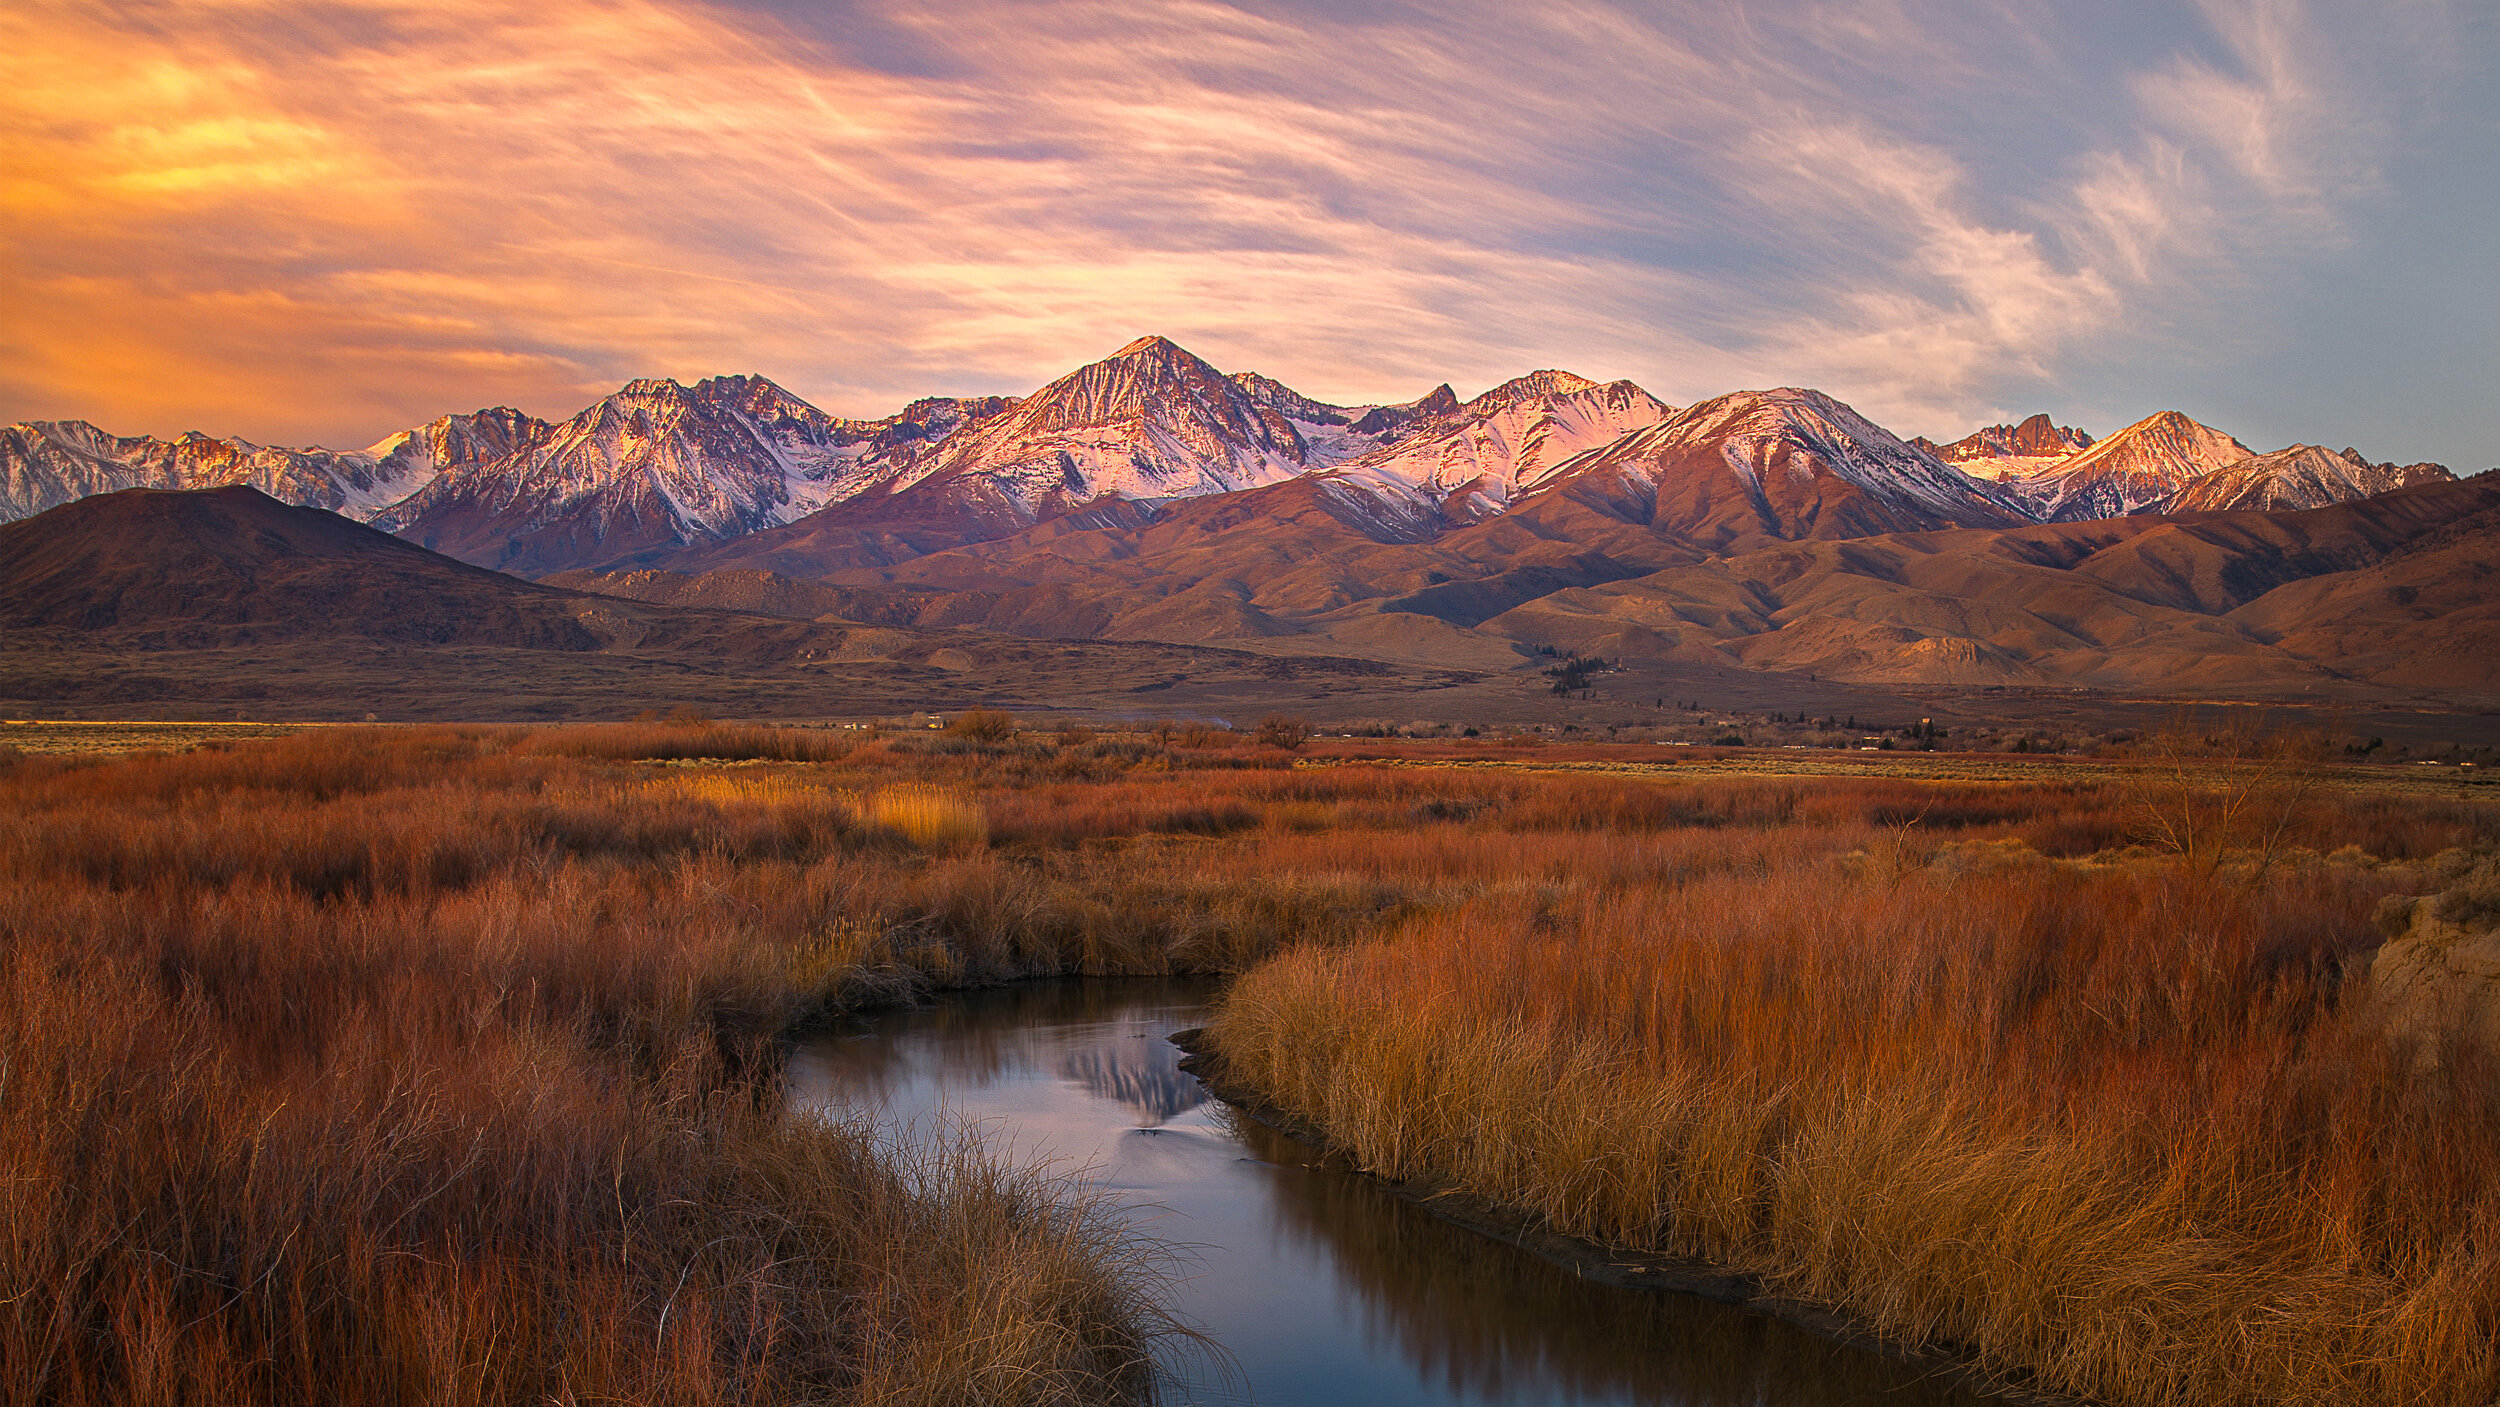 The Owens River